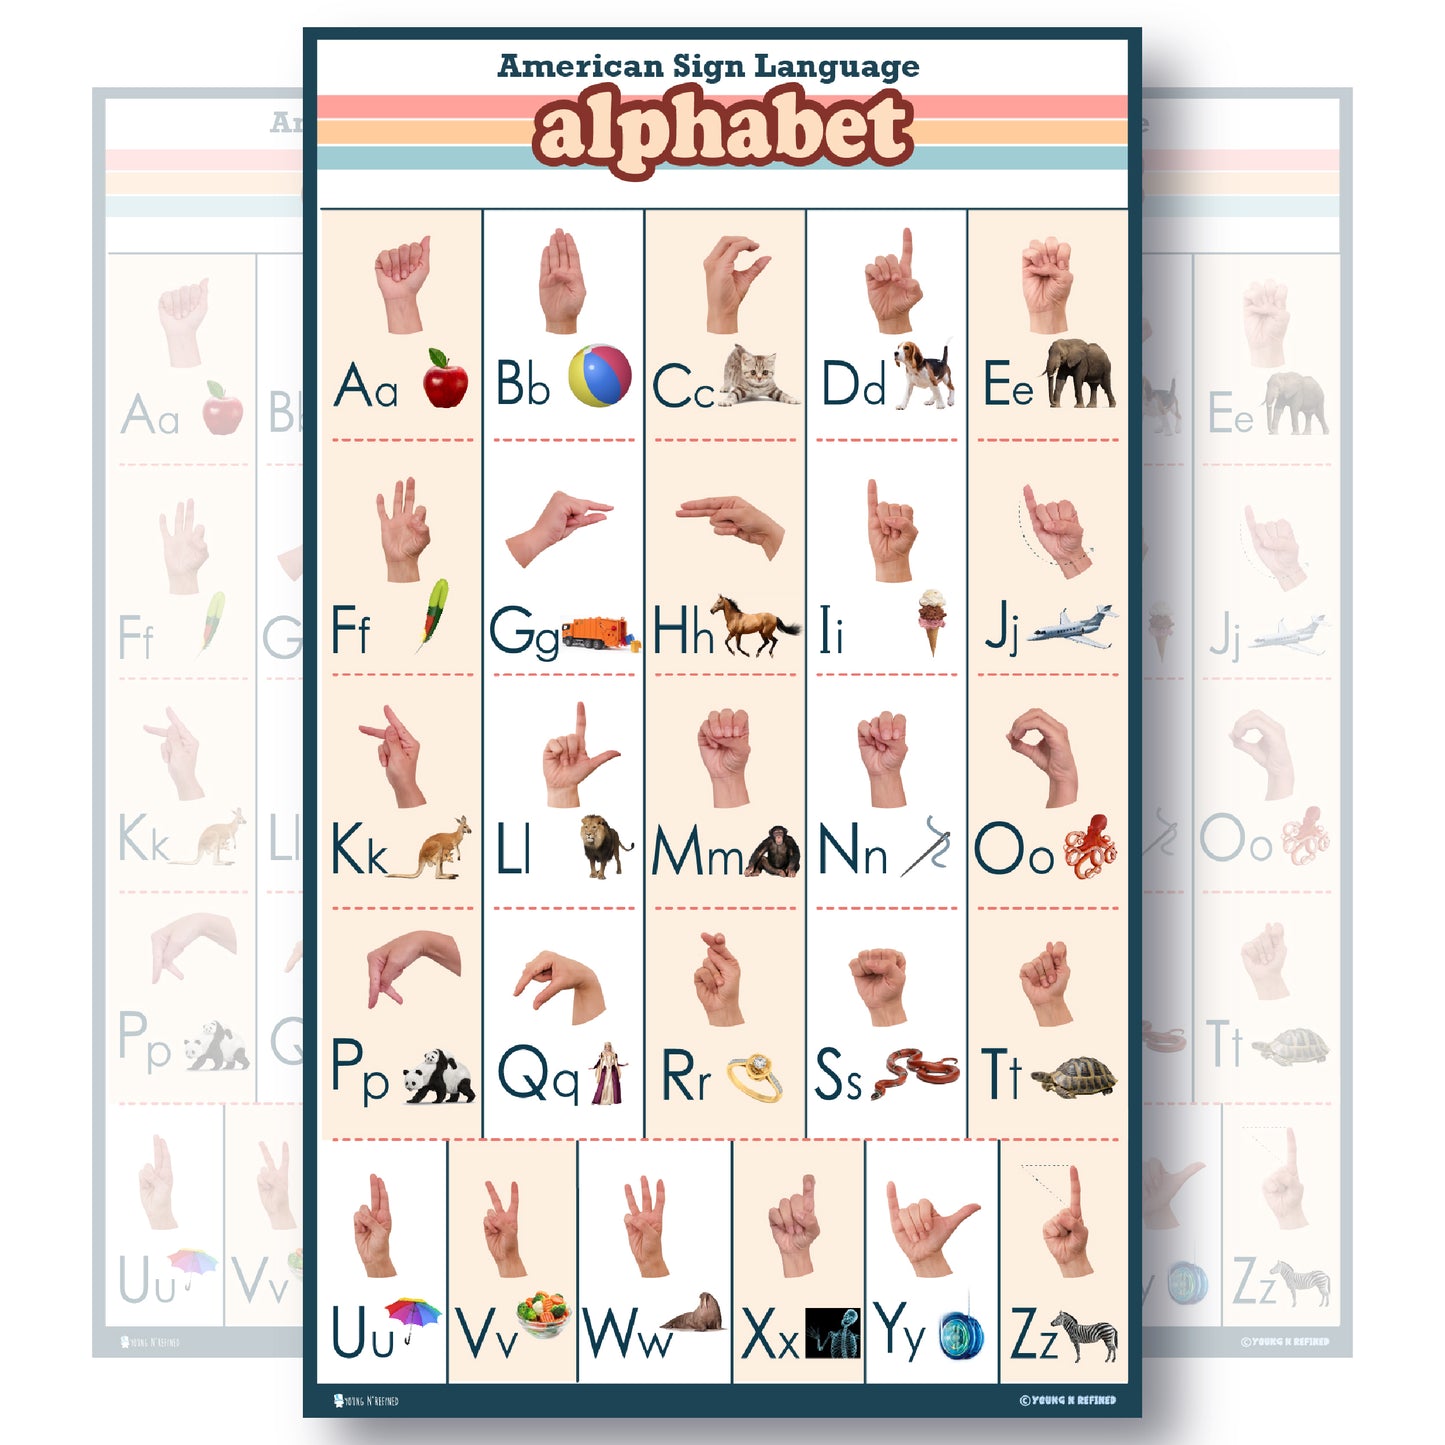 Signed American Alphabet Poster | climatetoothpaste